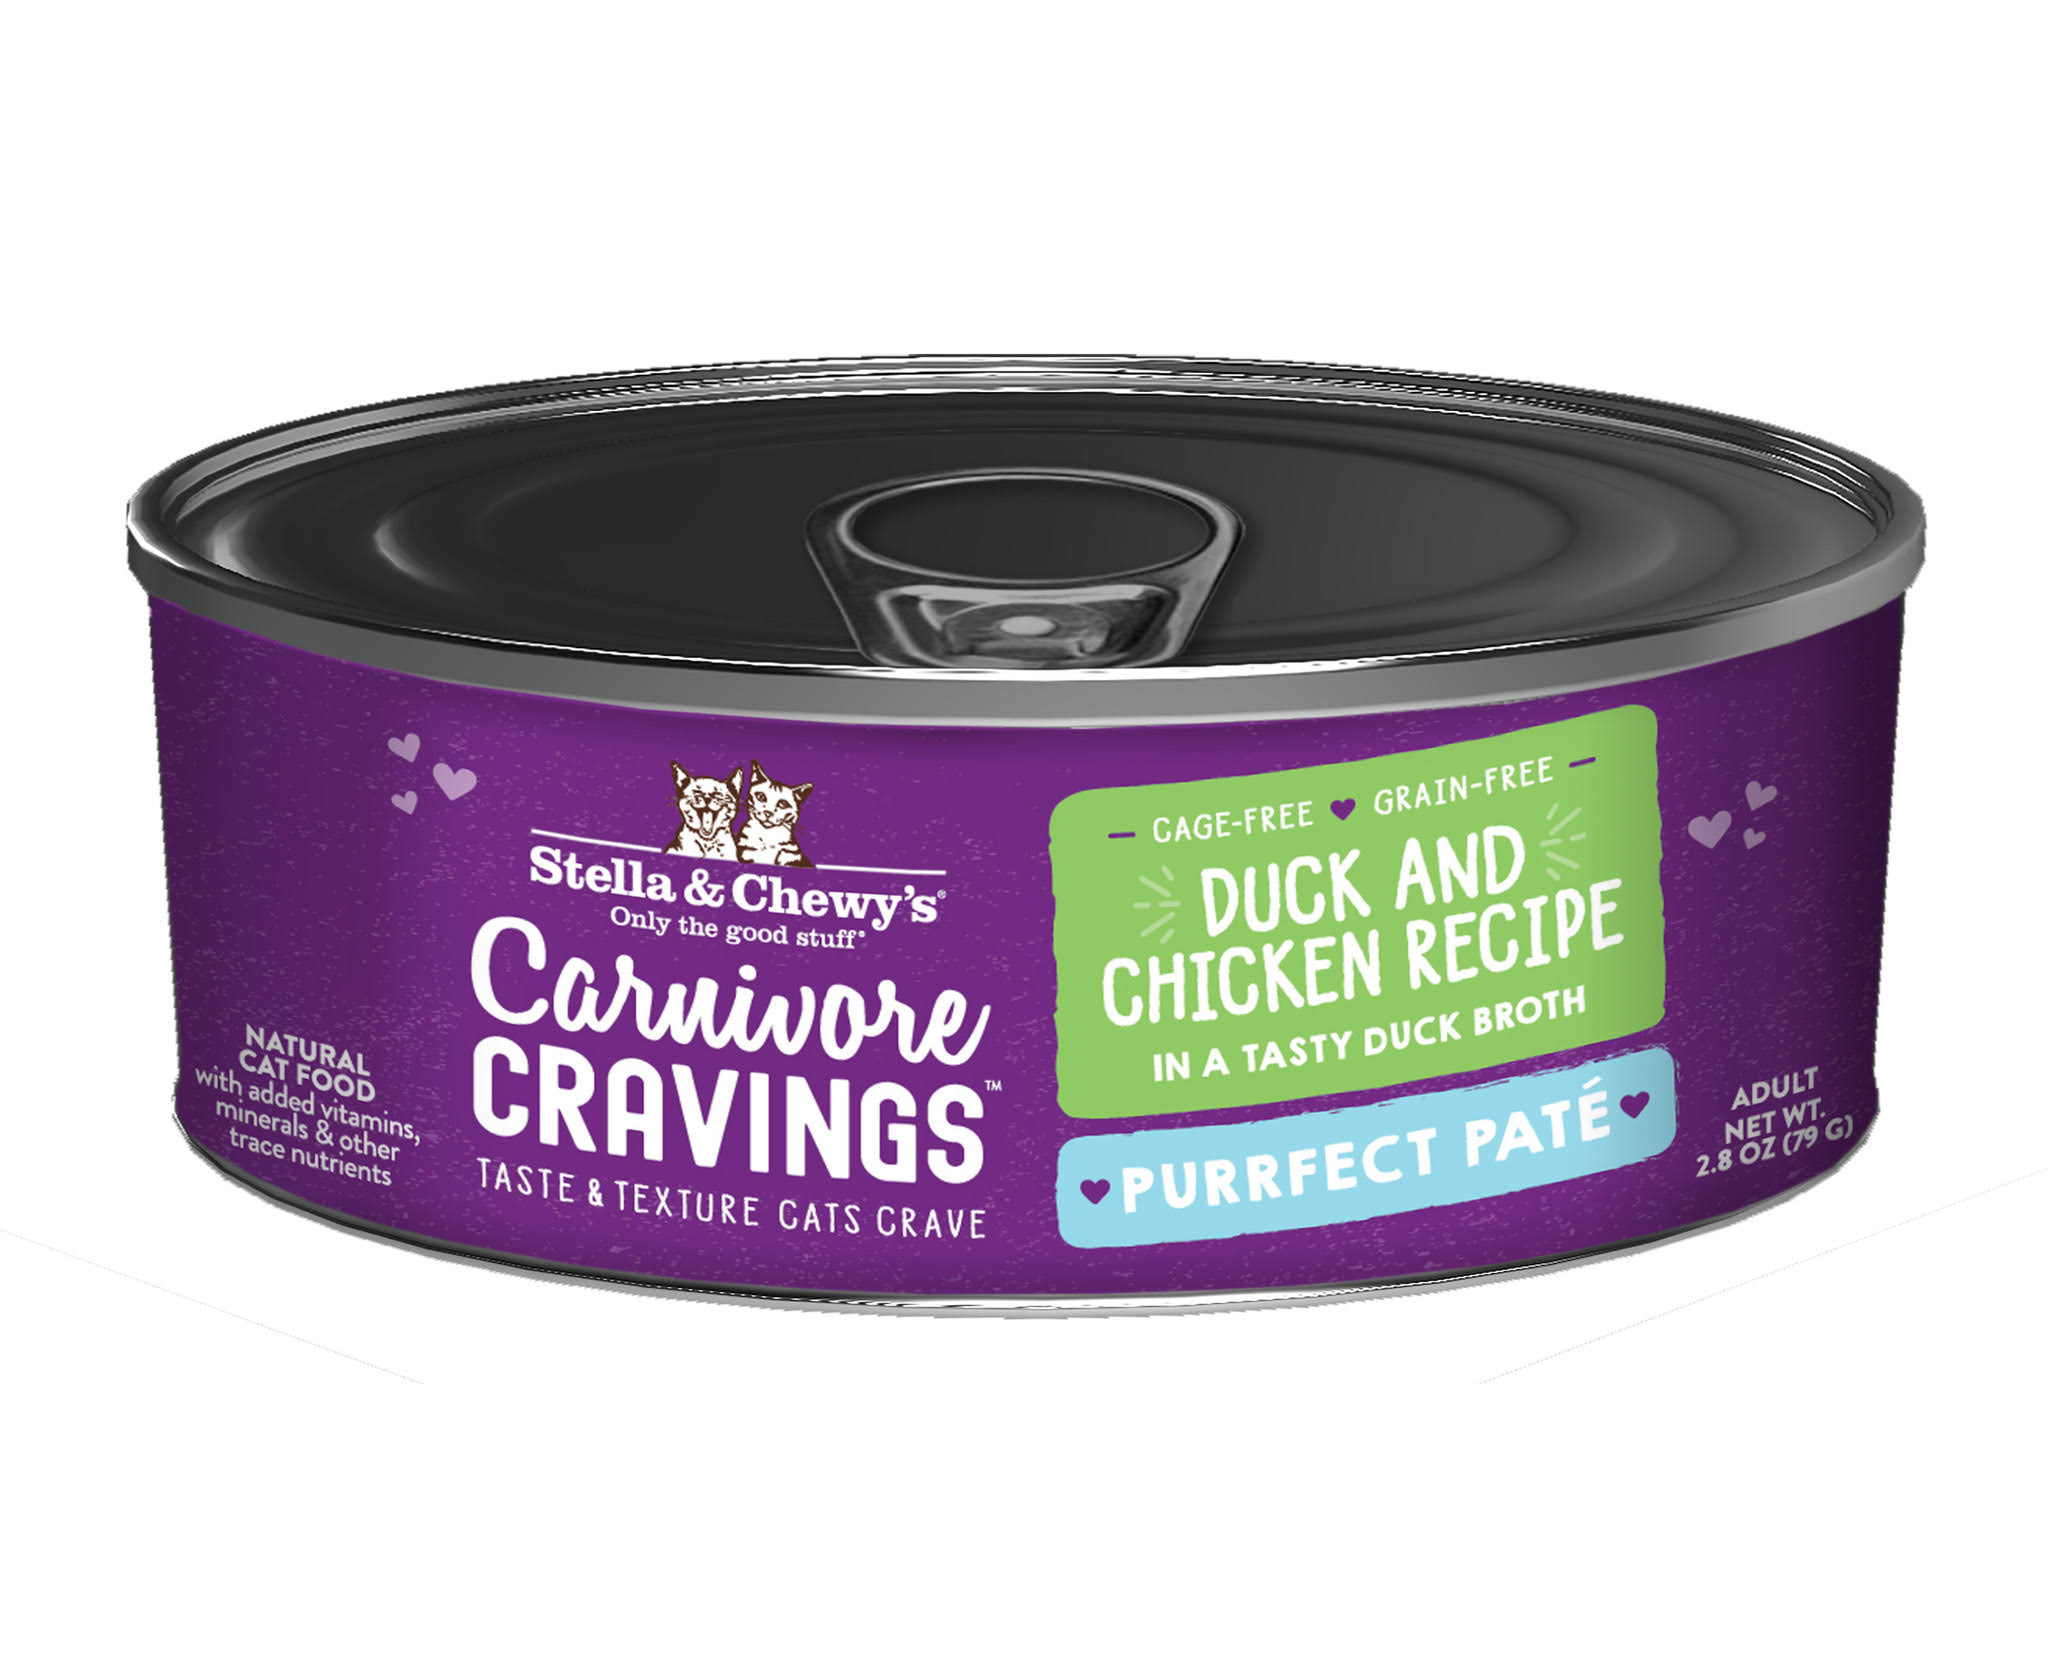 Stella & Chewy's 2.8oz Carnivore Cravings Duck & Chicken Pate